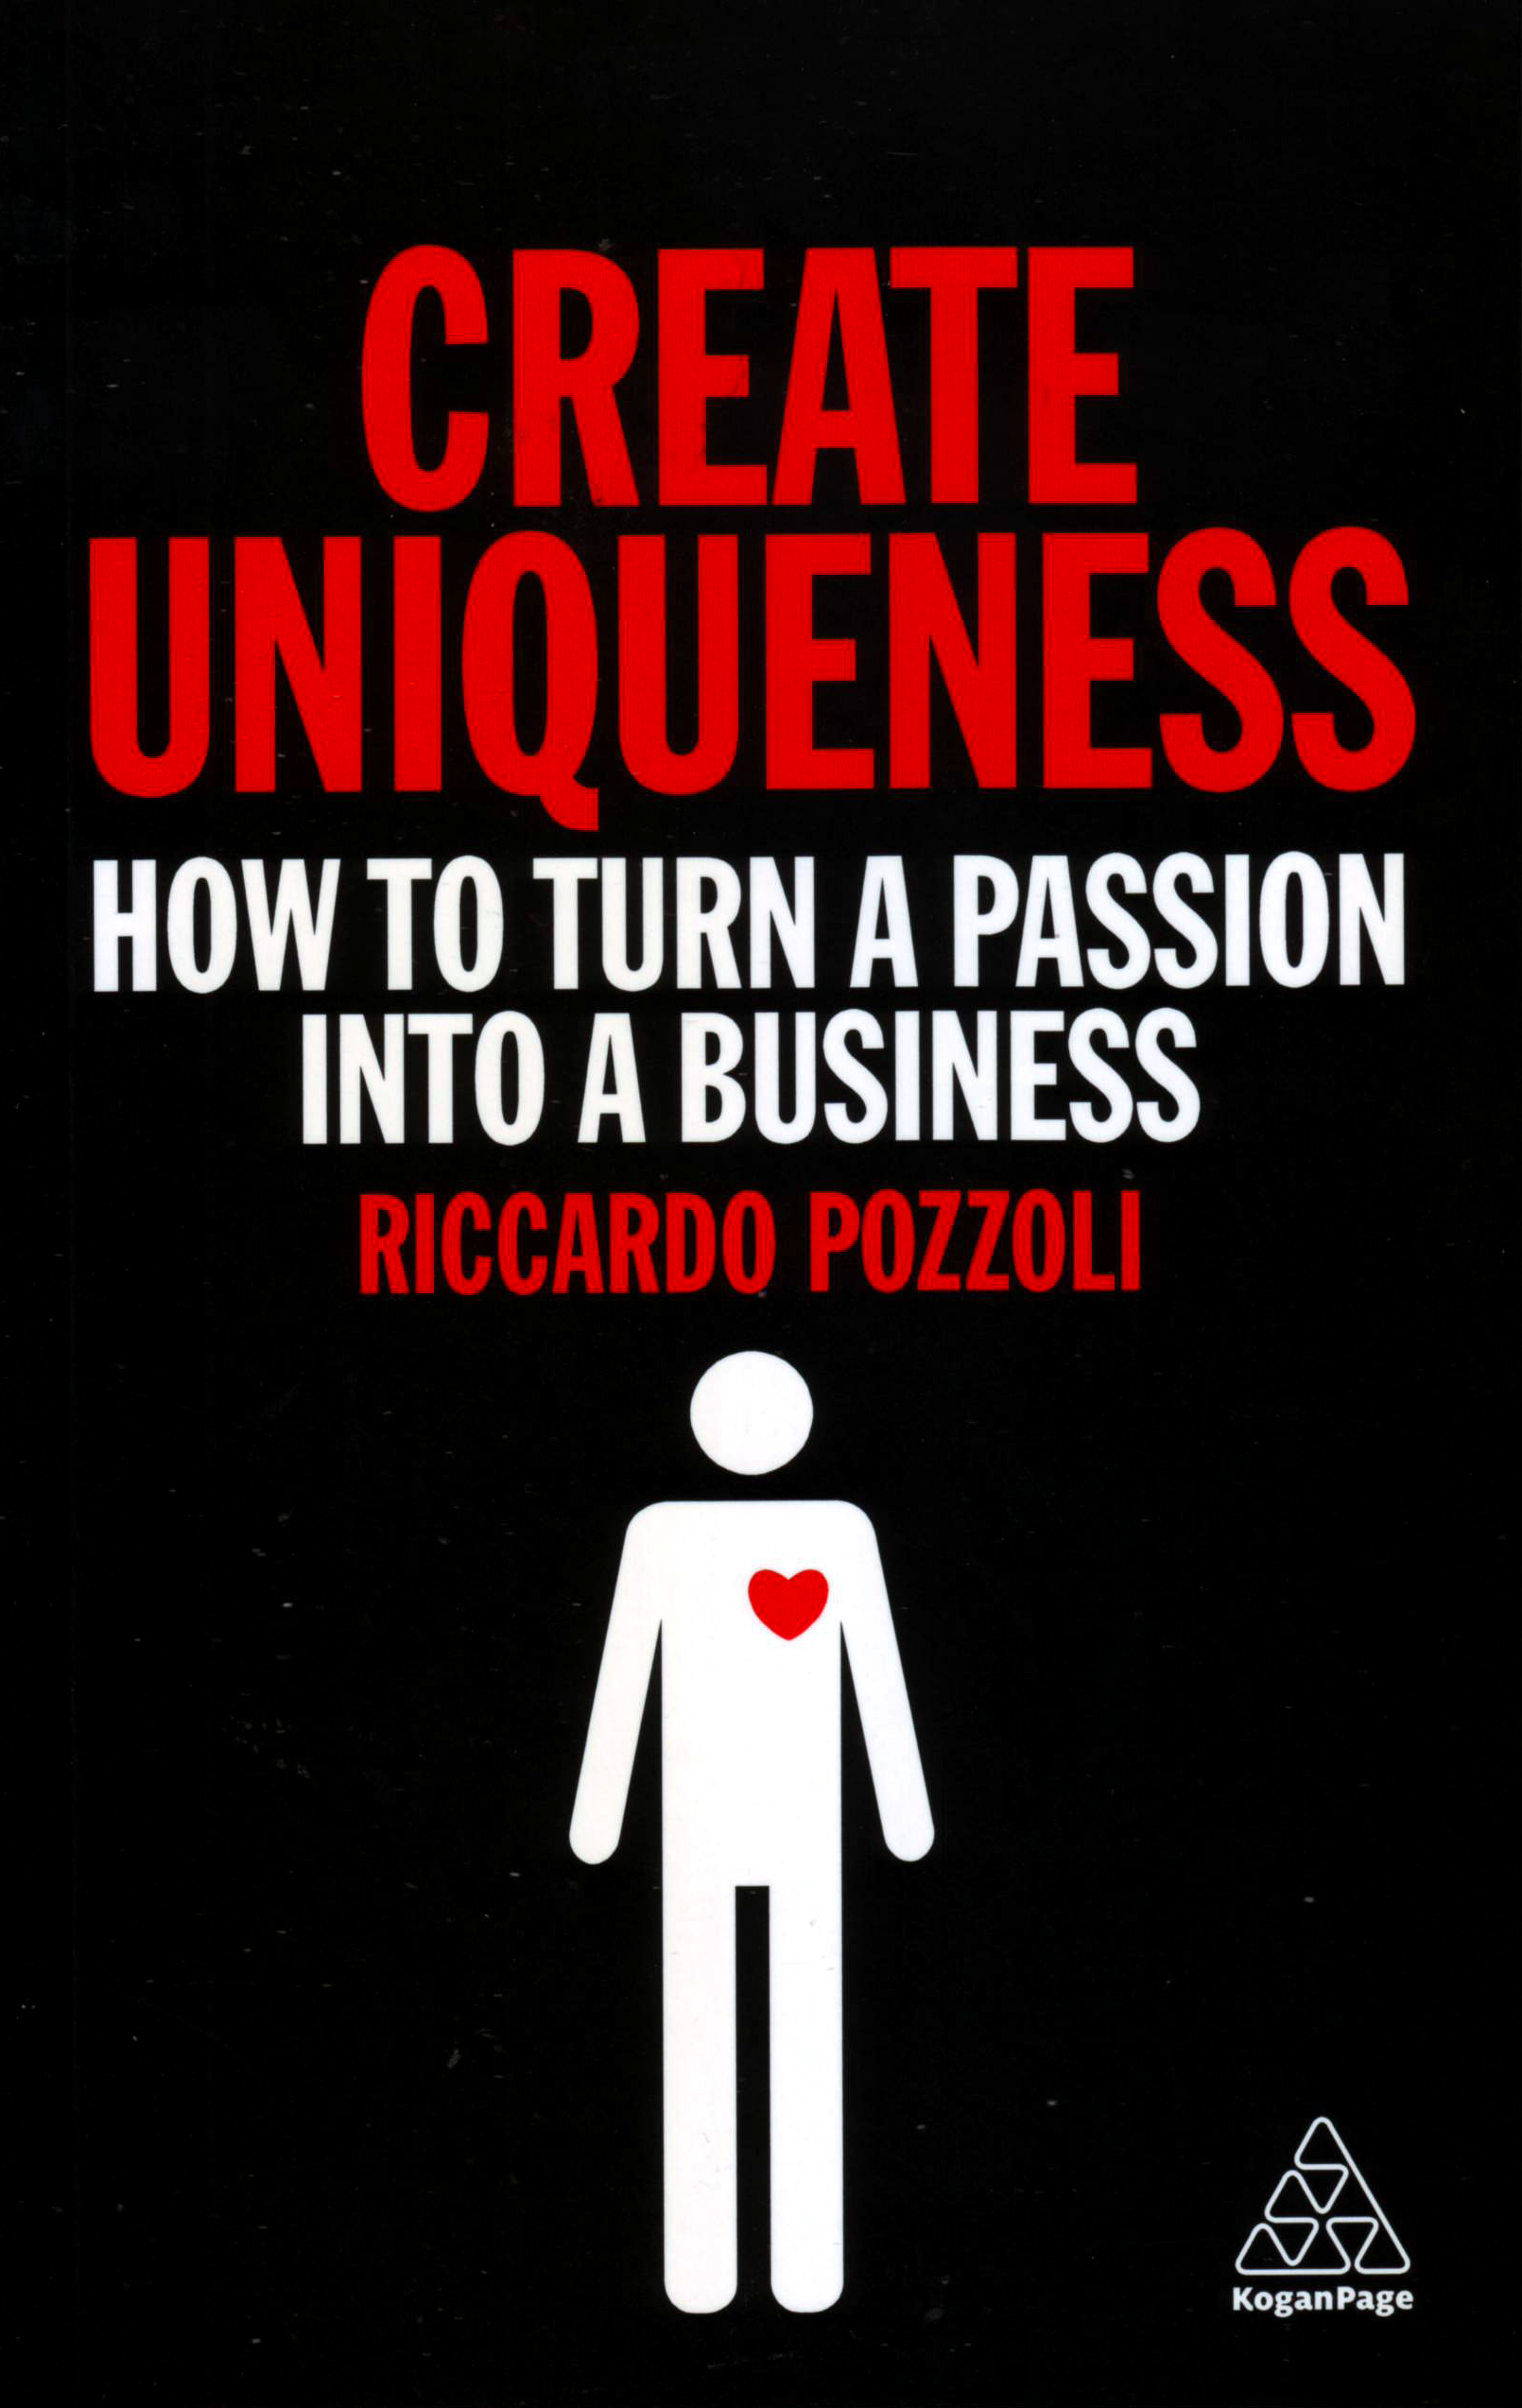 Create Uniqueness How to Turn a Passion Into a Business